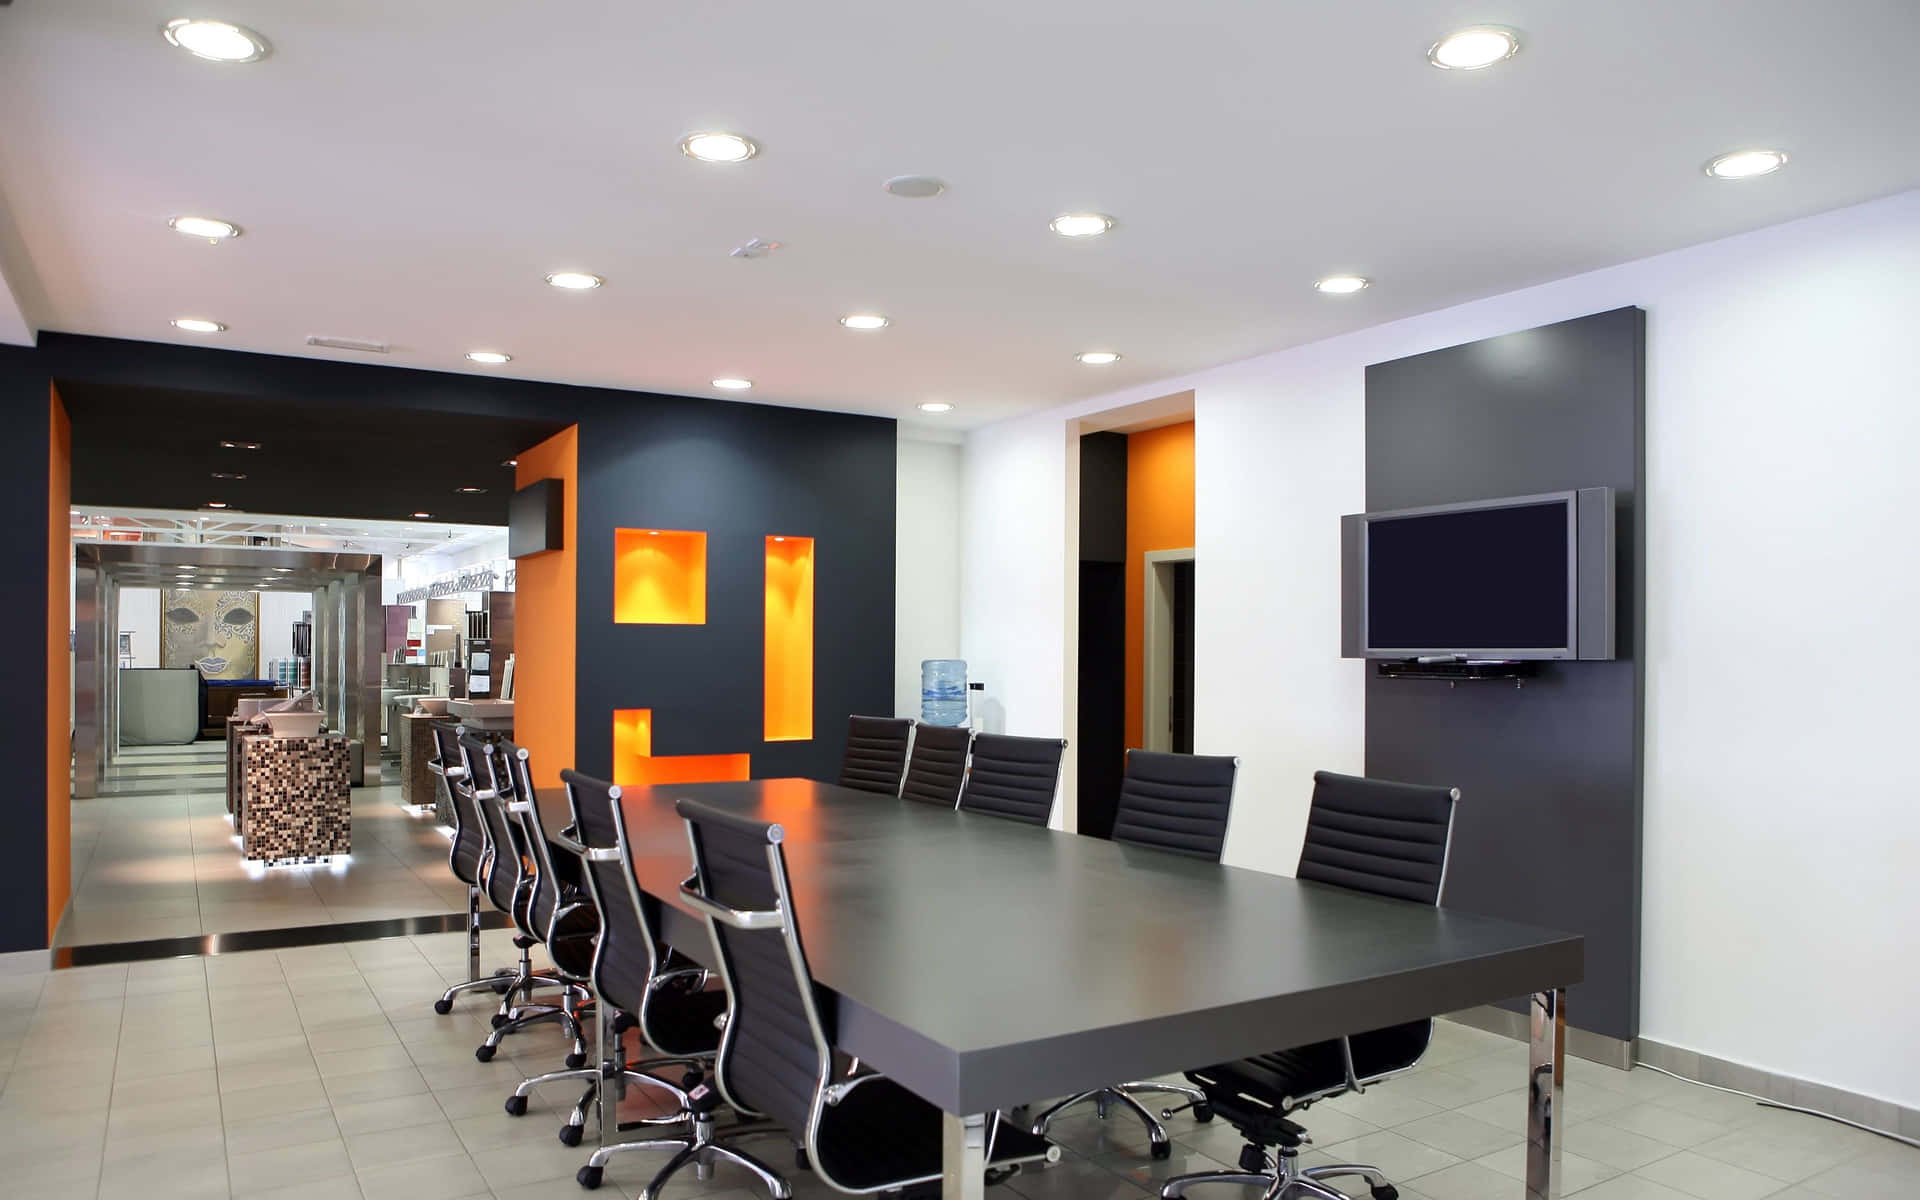 A Conference Room With Black Chairs And Orange Walls